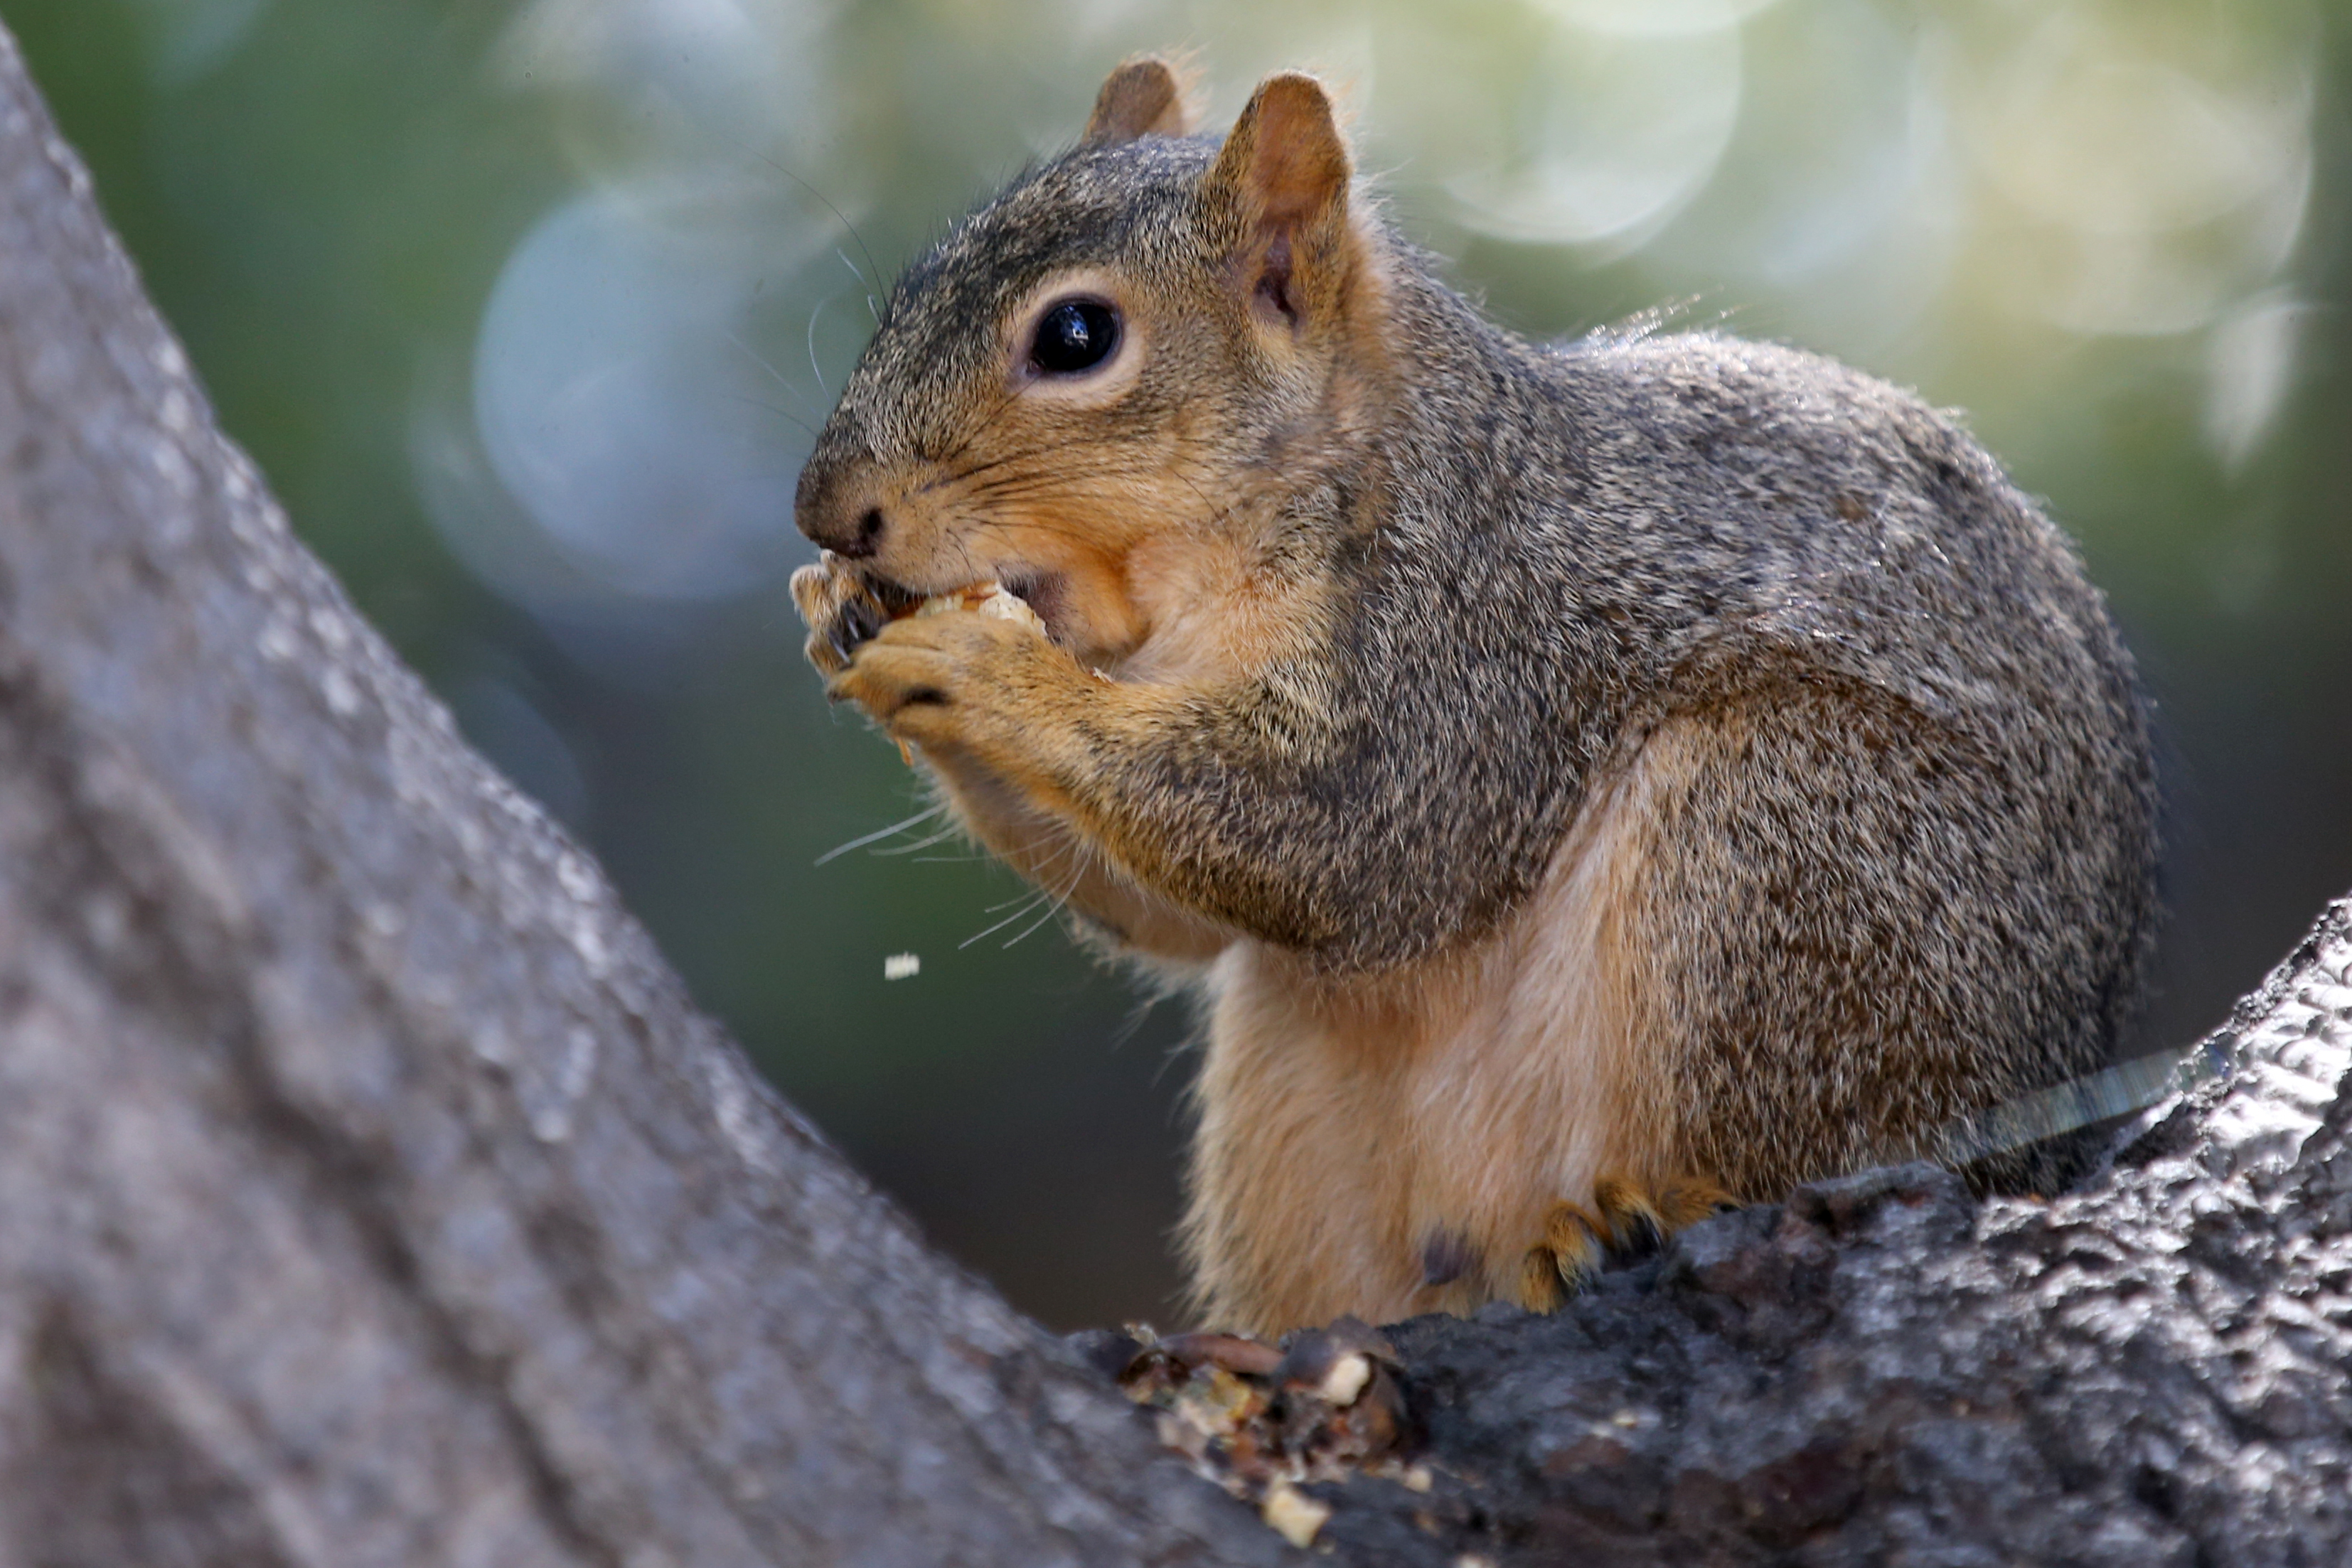 UC Berkeley research shows squirrel behavior is not so nutty